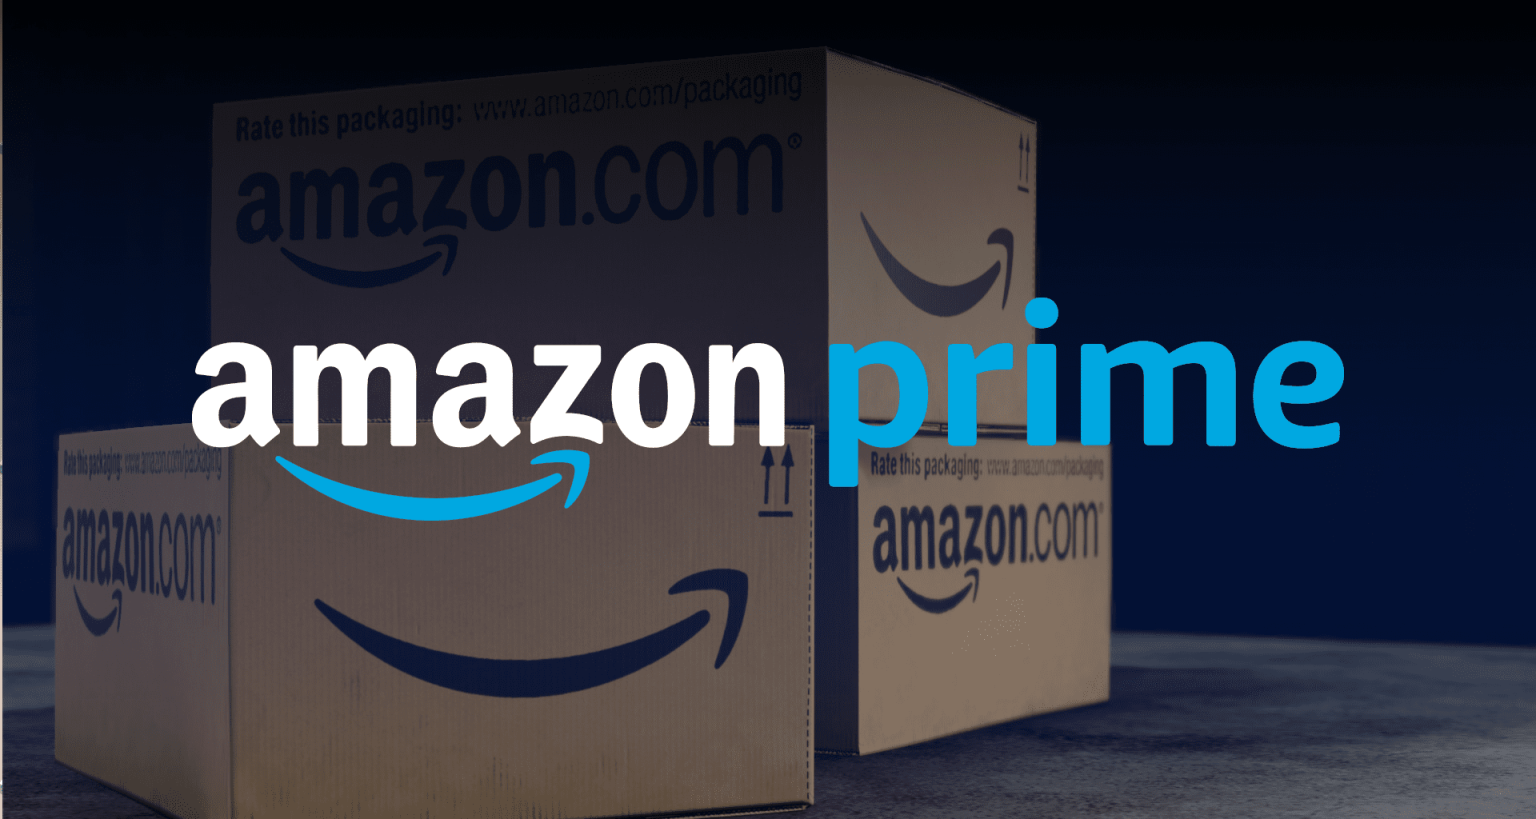 Amazon Prime Is It Worth The Cost?